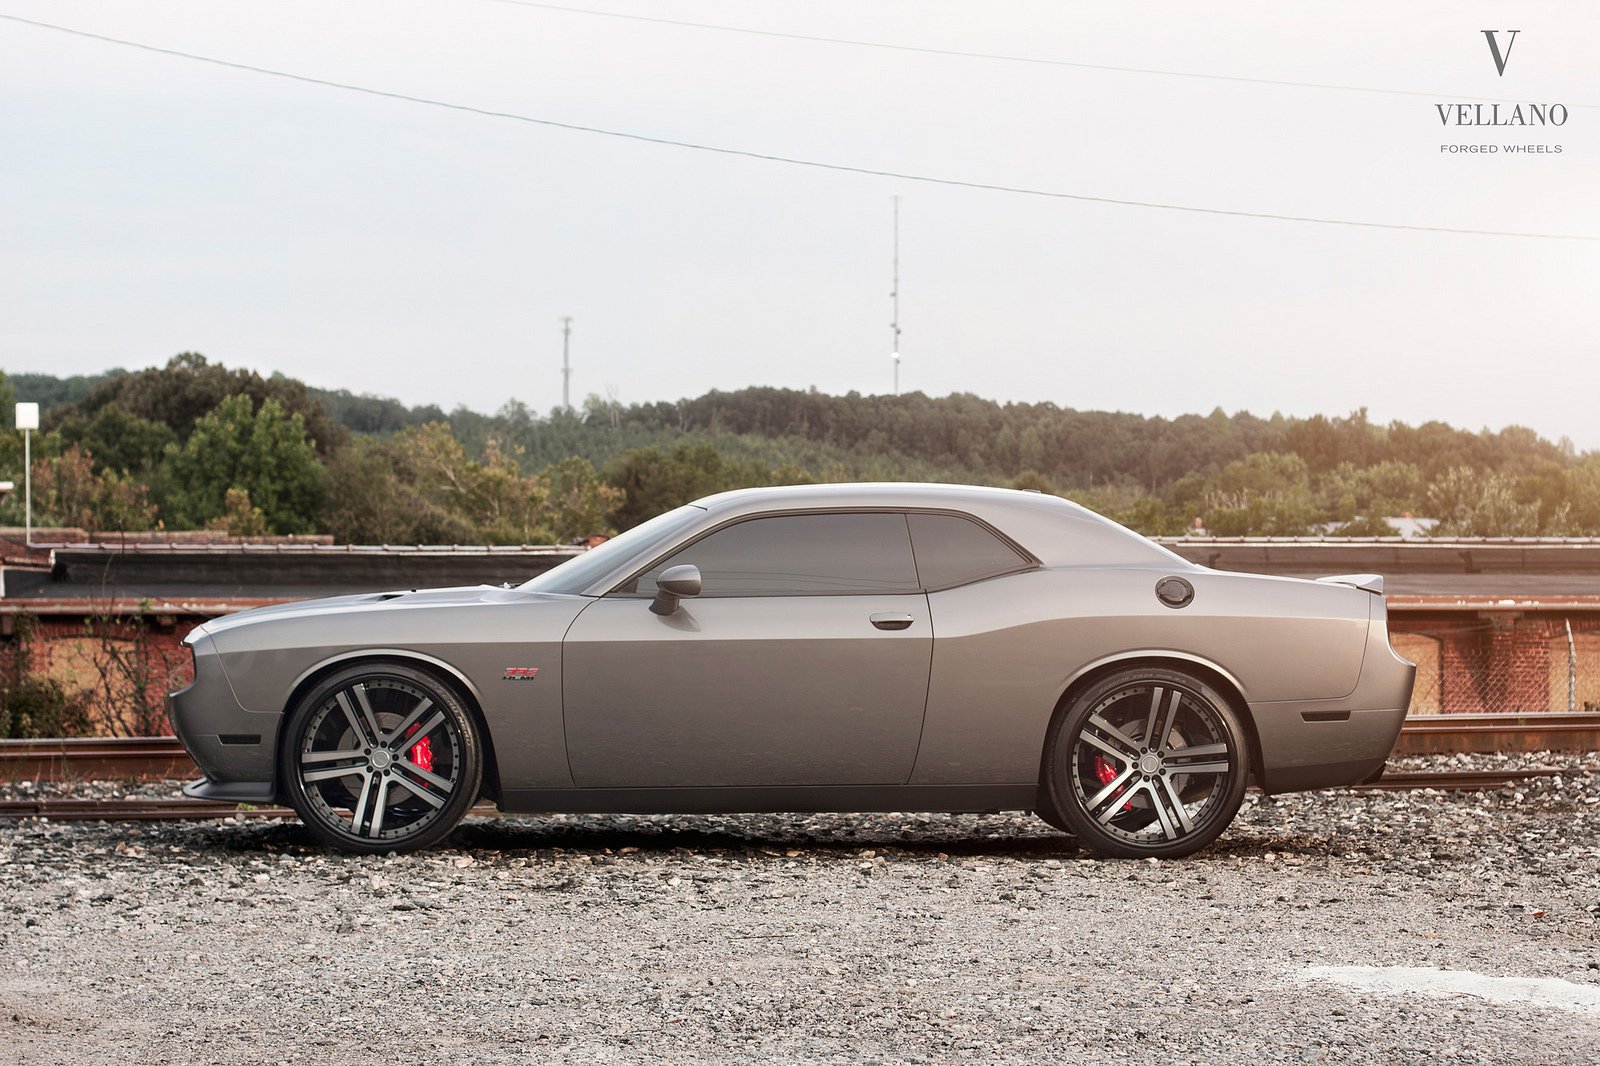 dodge, Challenger, Supercharger, Vellano, Wheels, Tuning, Cars Wallpaper